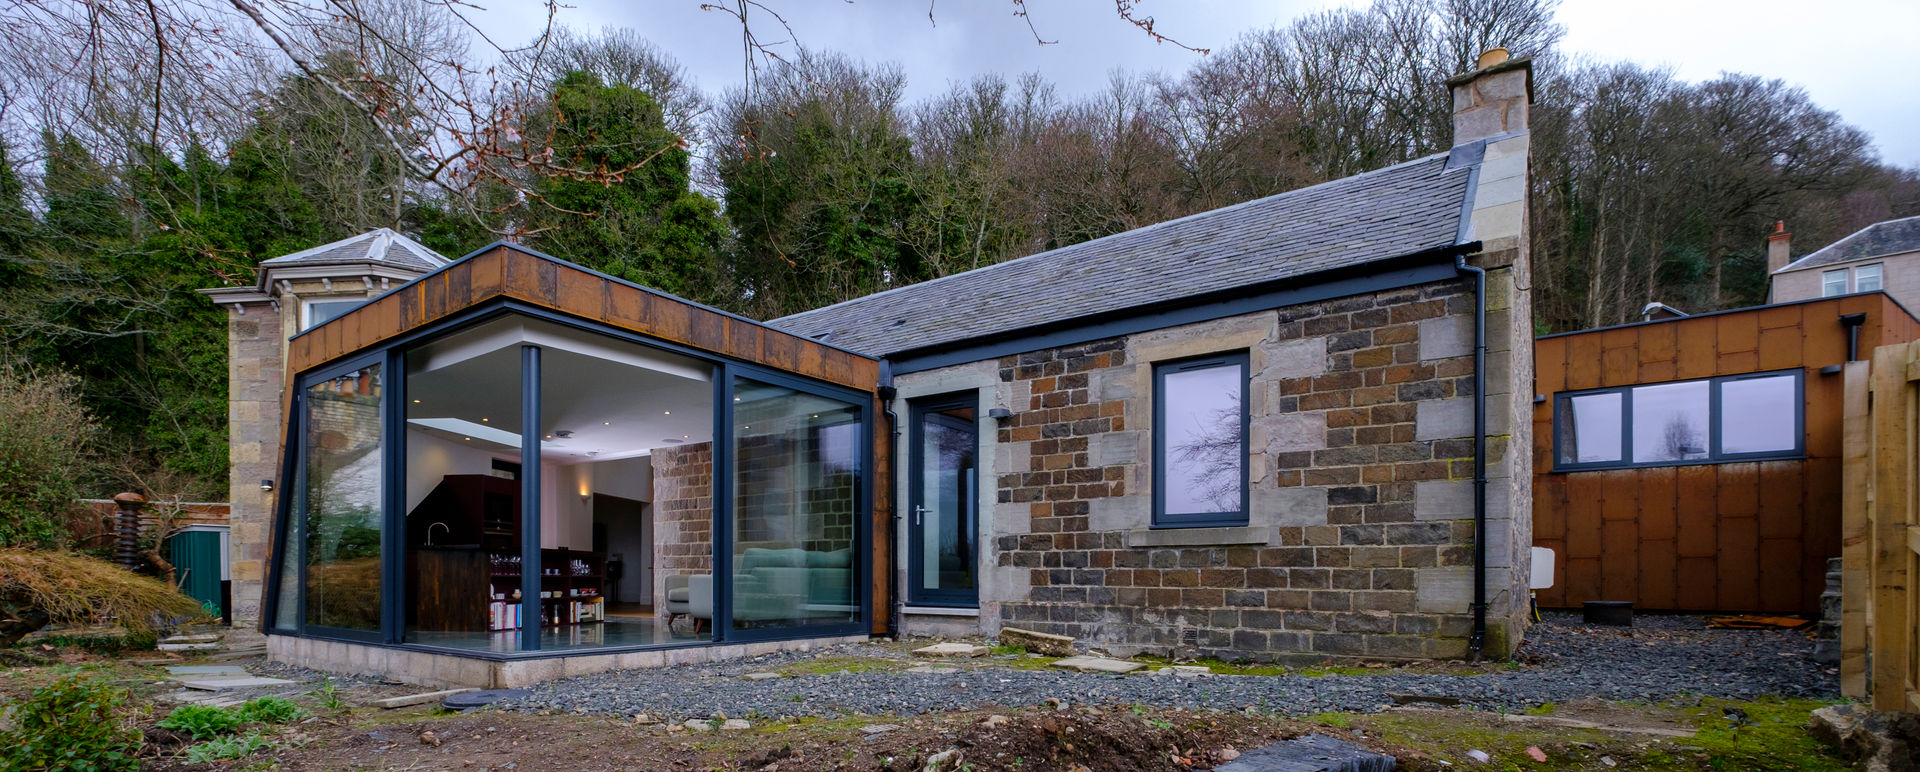 The rear extension to Woodend Cottage is clad in Corten steel and features large glass sliding doors Woodside Parker Kirk Architects منازل حديد Corten steel,cladding,cottage,extension,flat roof,alu-clad windows,daylight,garden